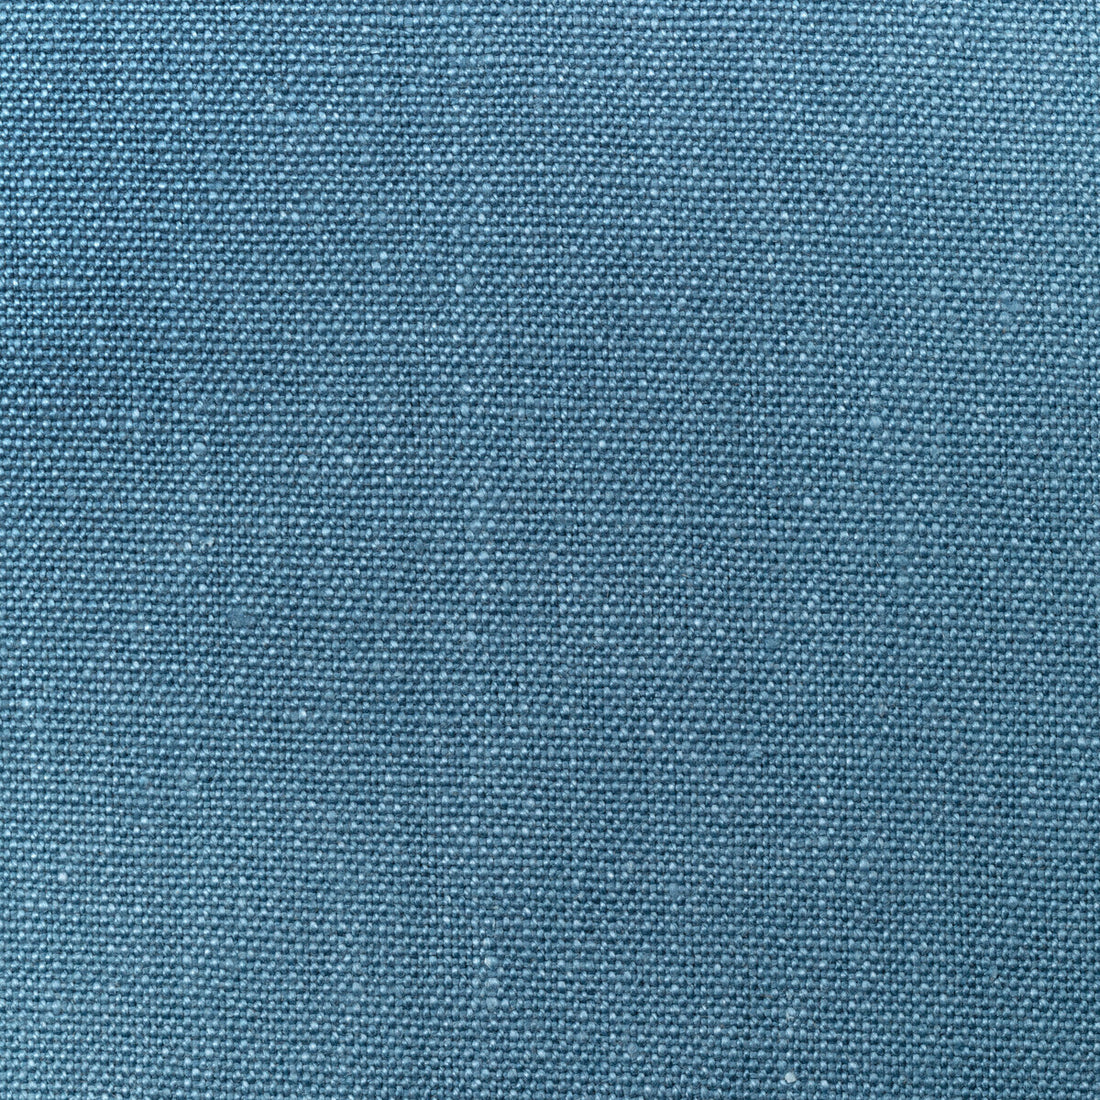 Watermill Linen fabric in blue color - pattern 2012176.515.0 - by Lee Jofa in the Colour Complements II collection